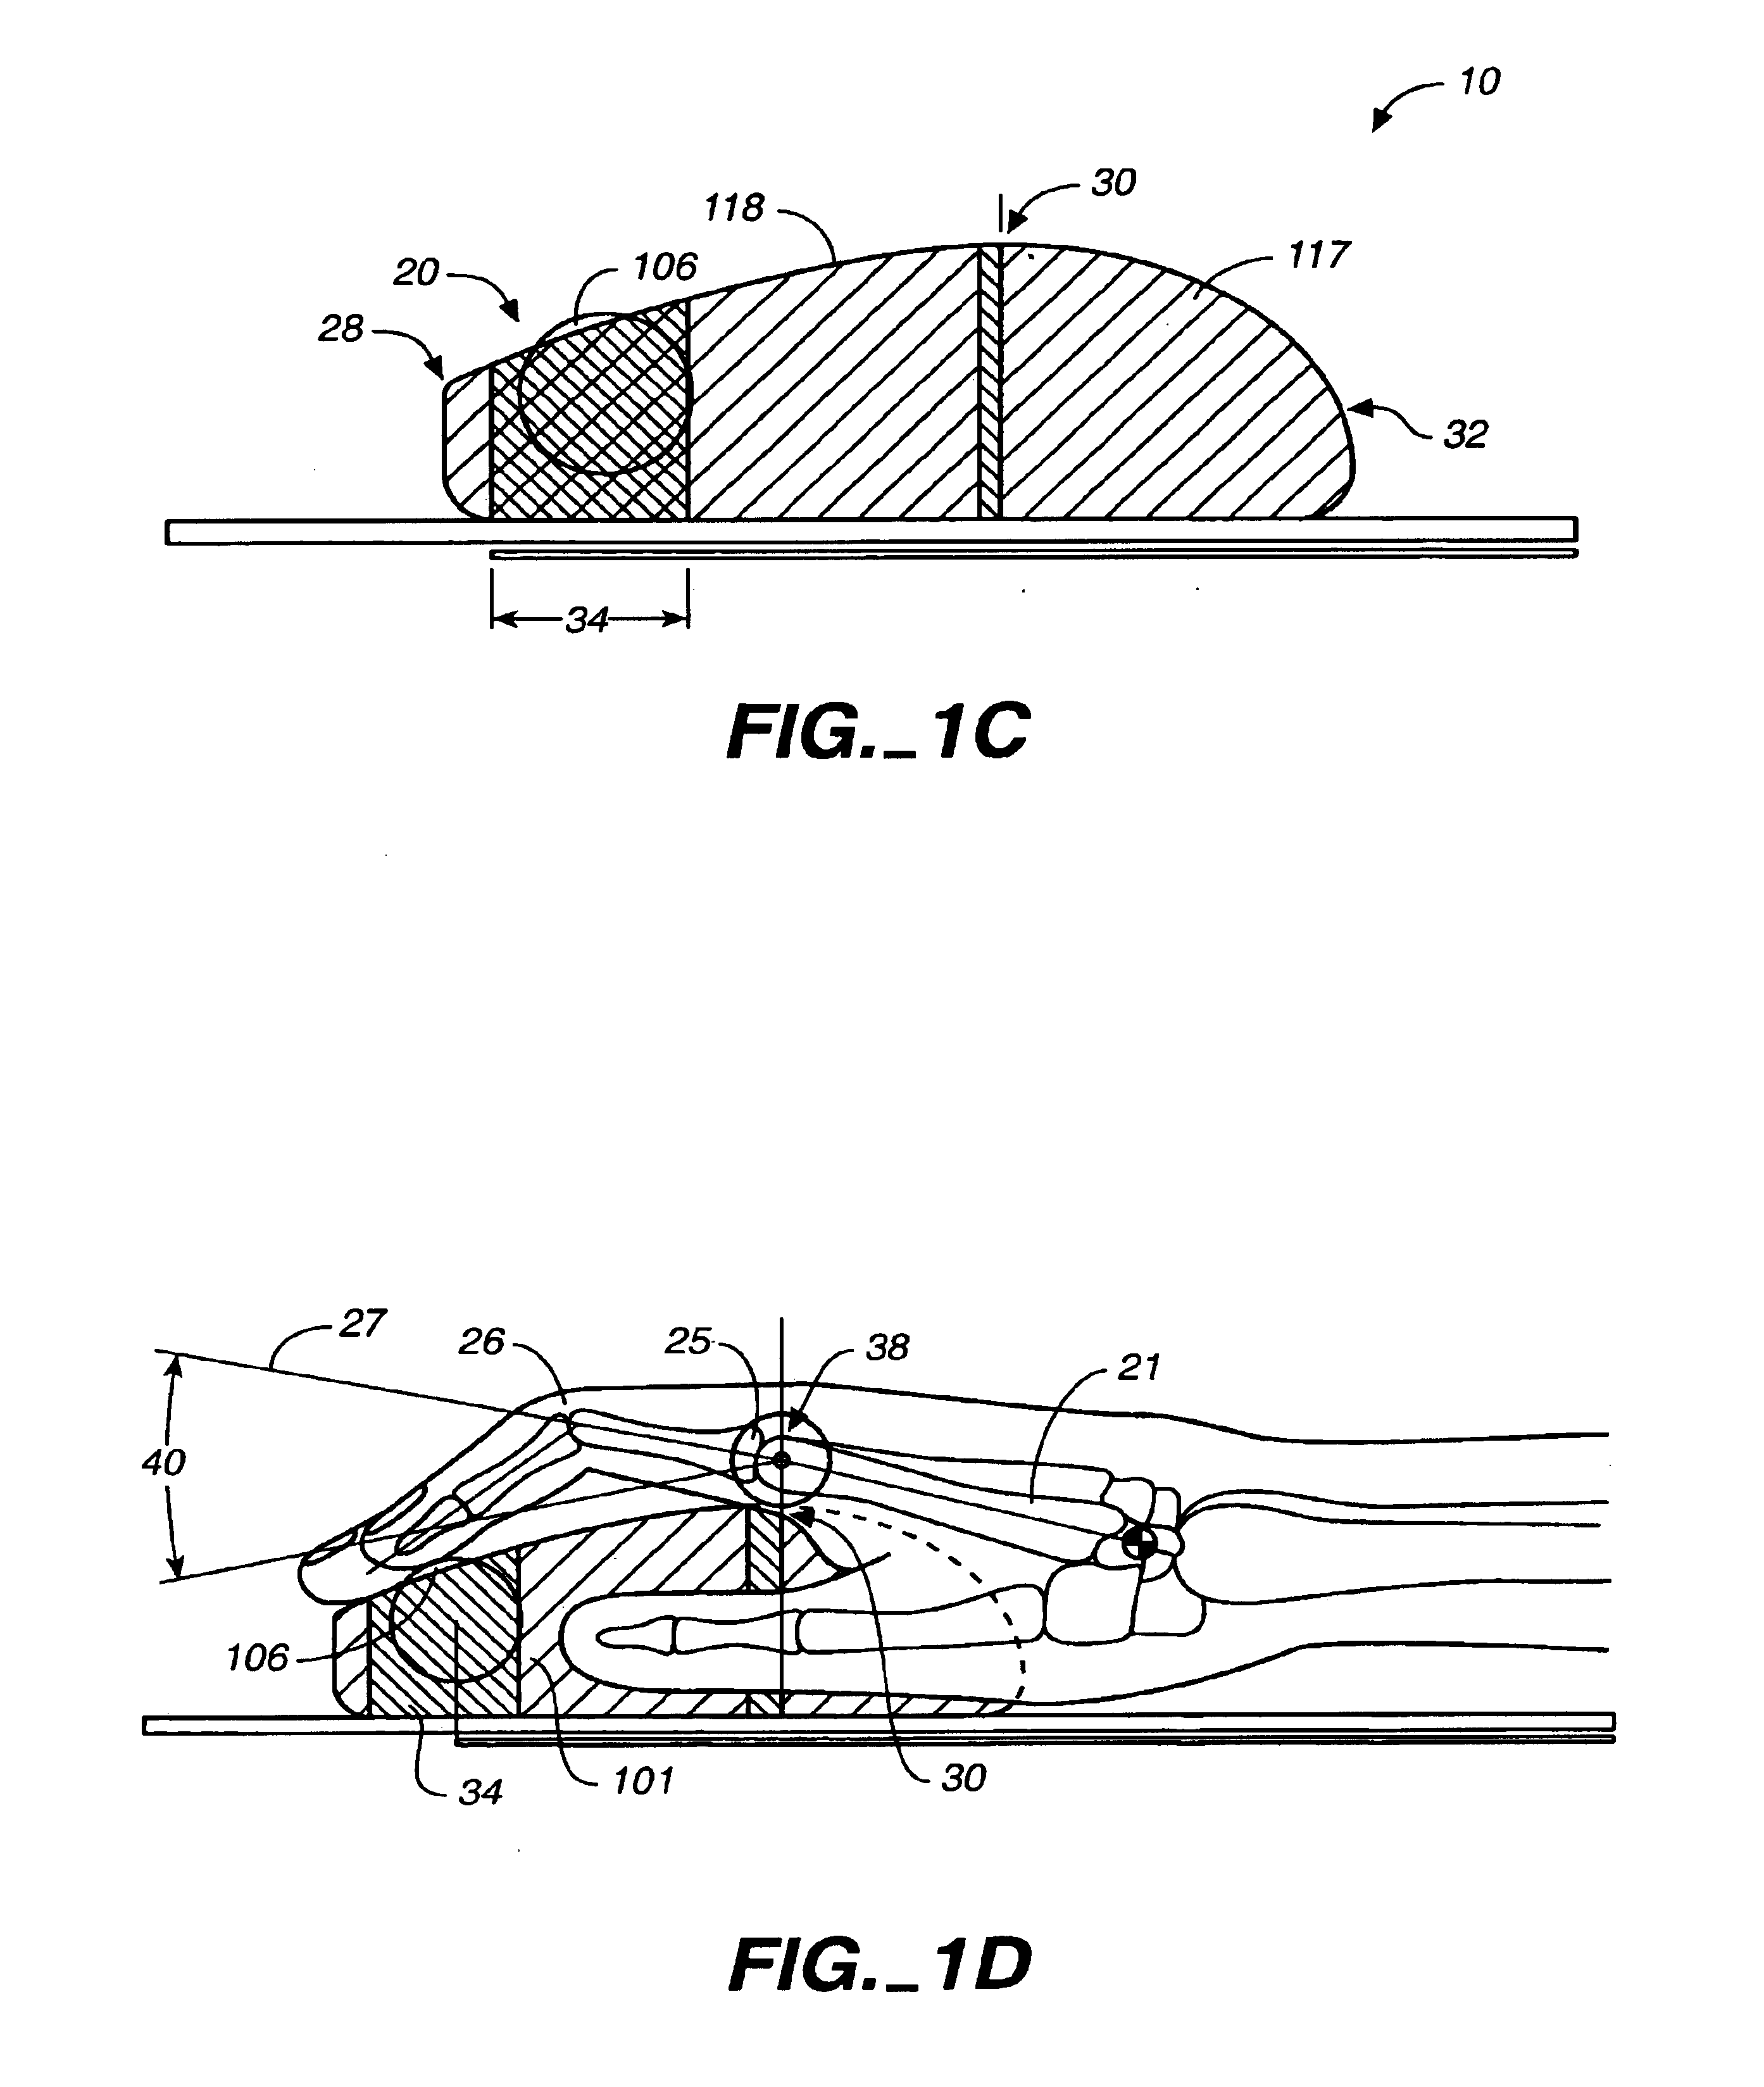 System and method of adjusting display characteristics of a displayable data file using an ergonomic computer input device